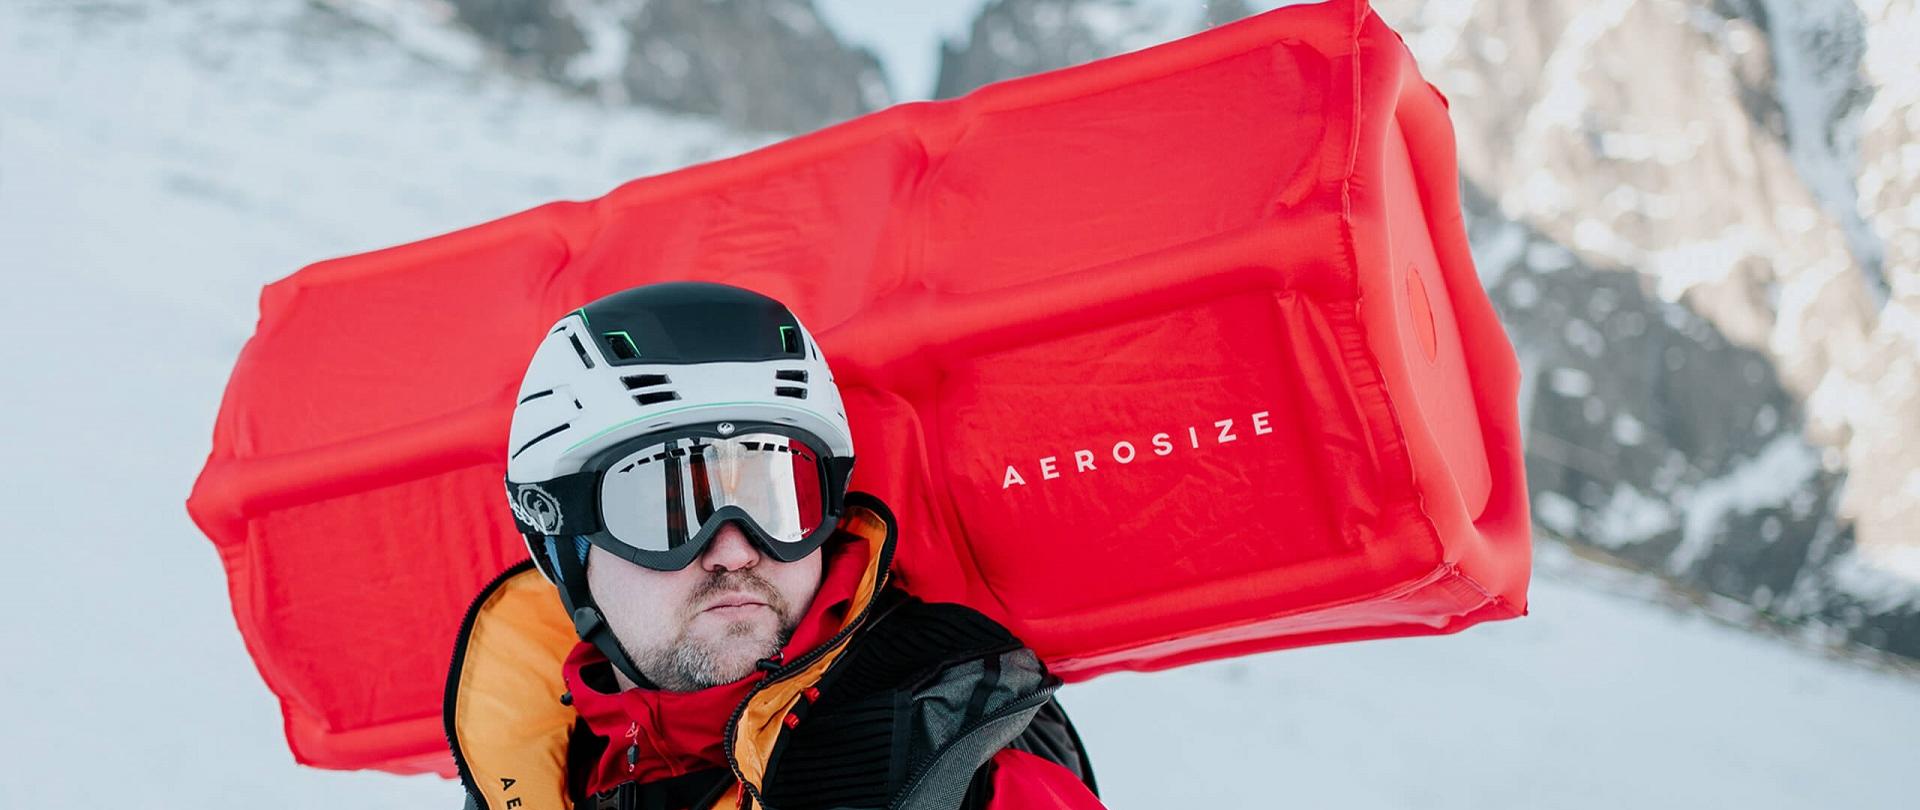 Our team member Maciej Roth in an activated AEROSIZE avalanche airbag.